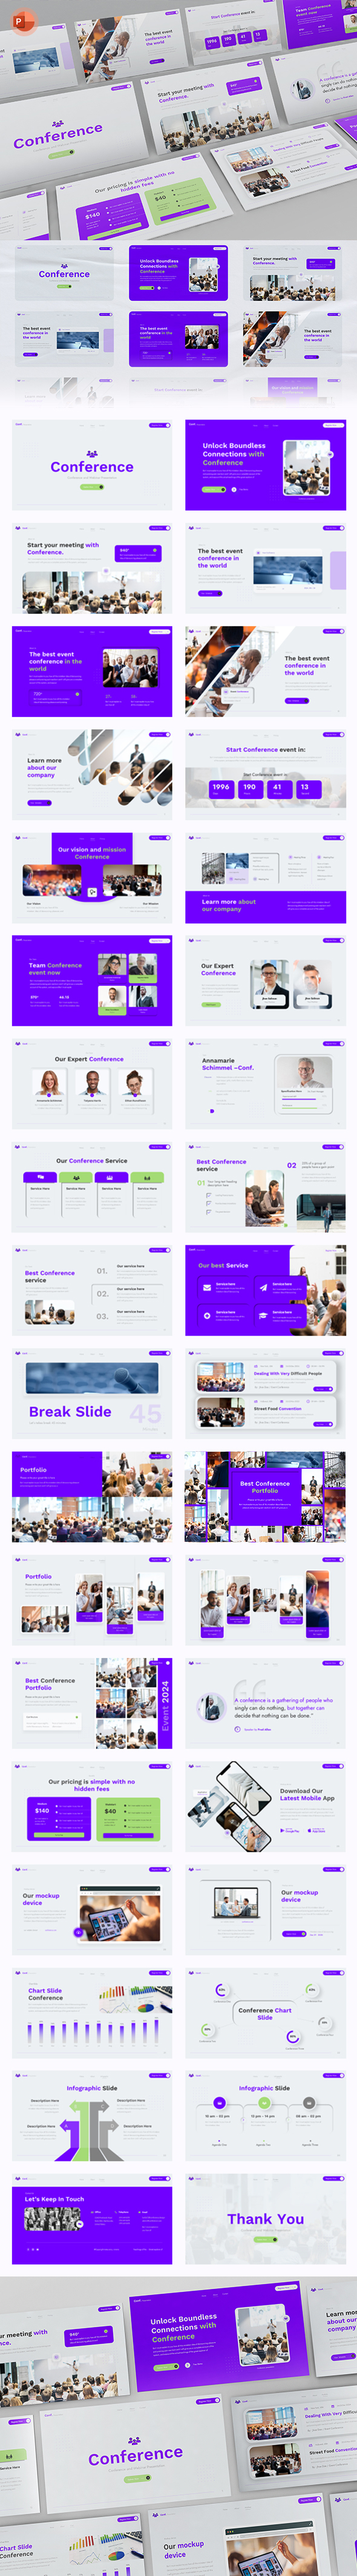 Conference - Event Online and Webinar Powerpoint Template